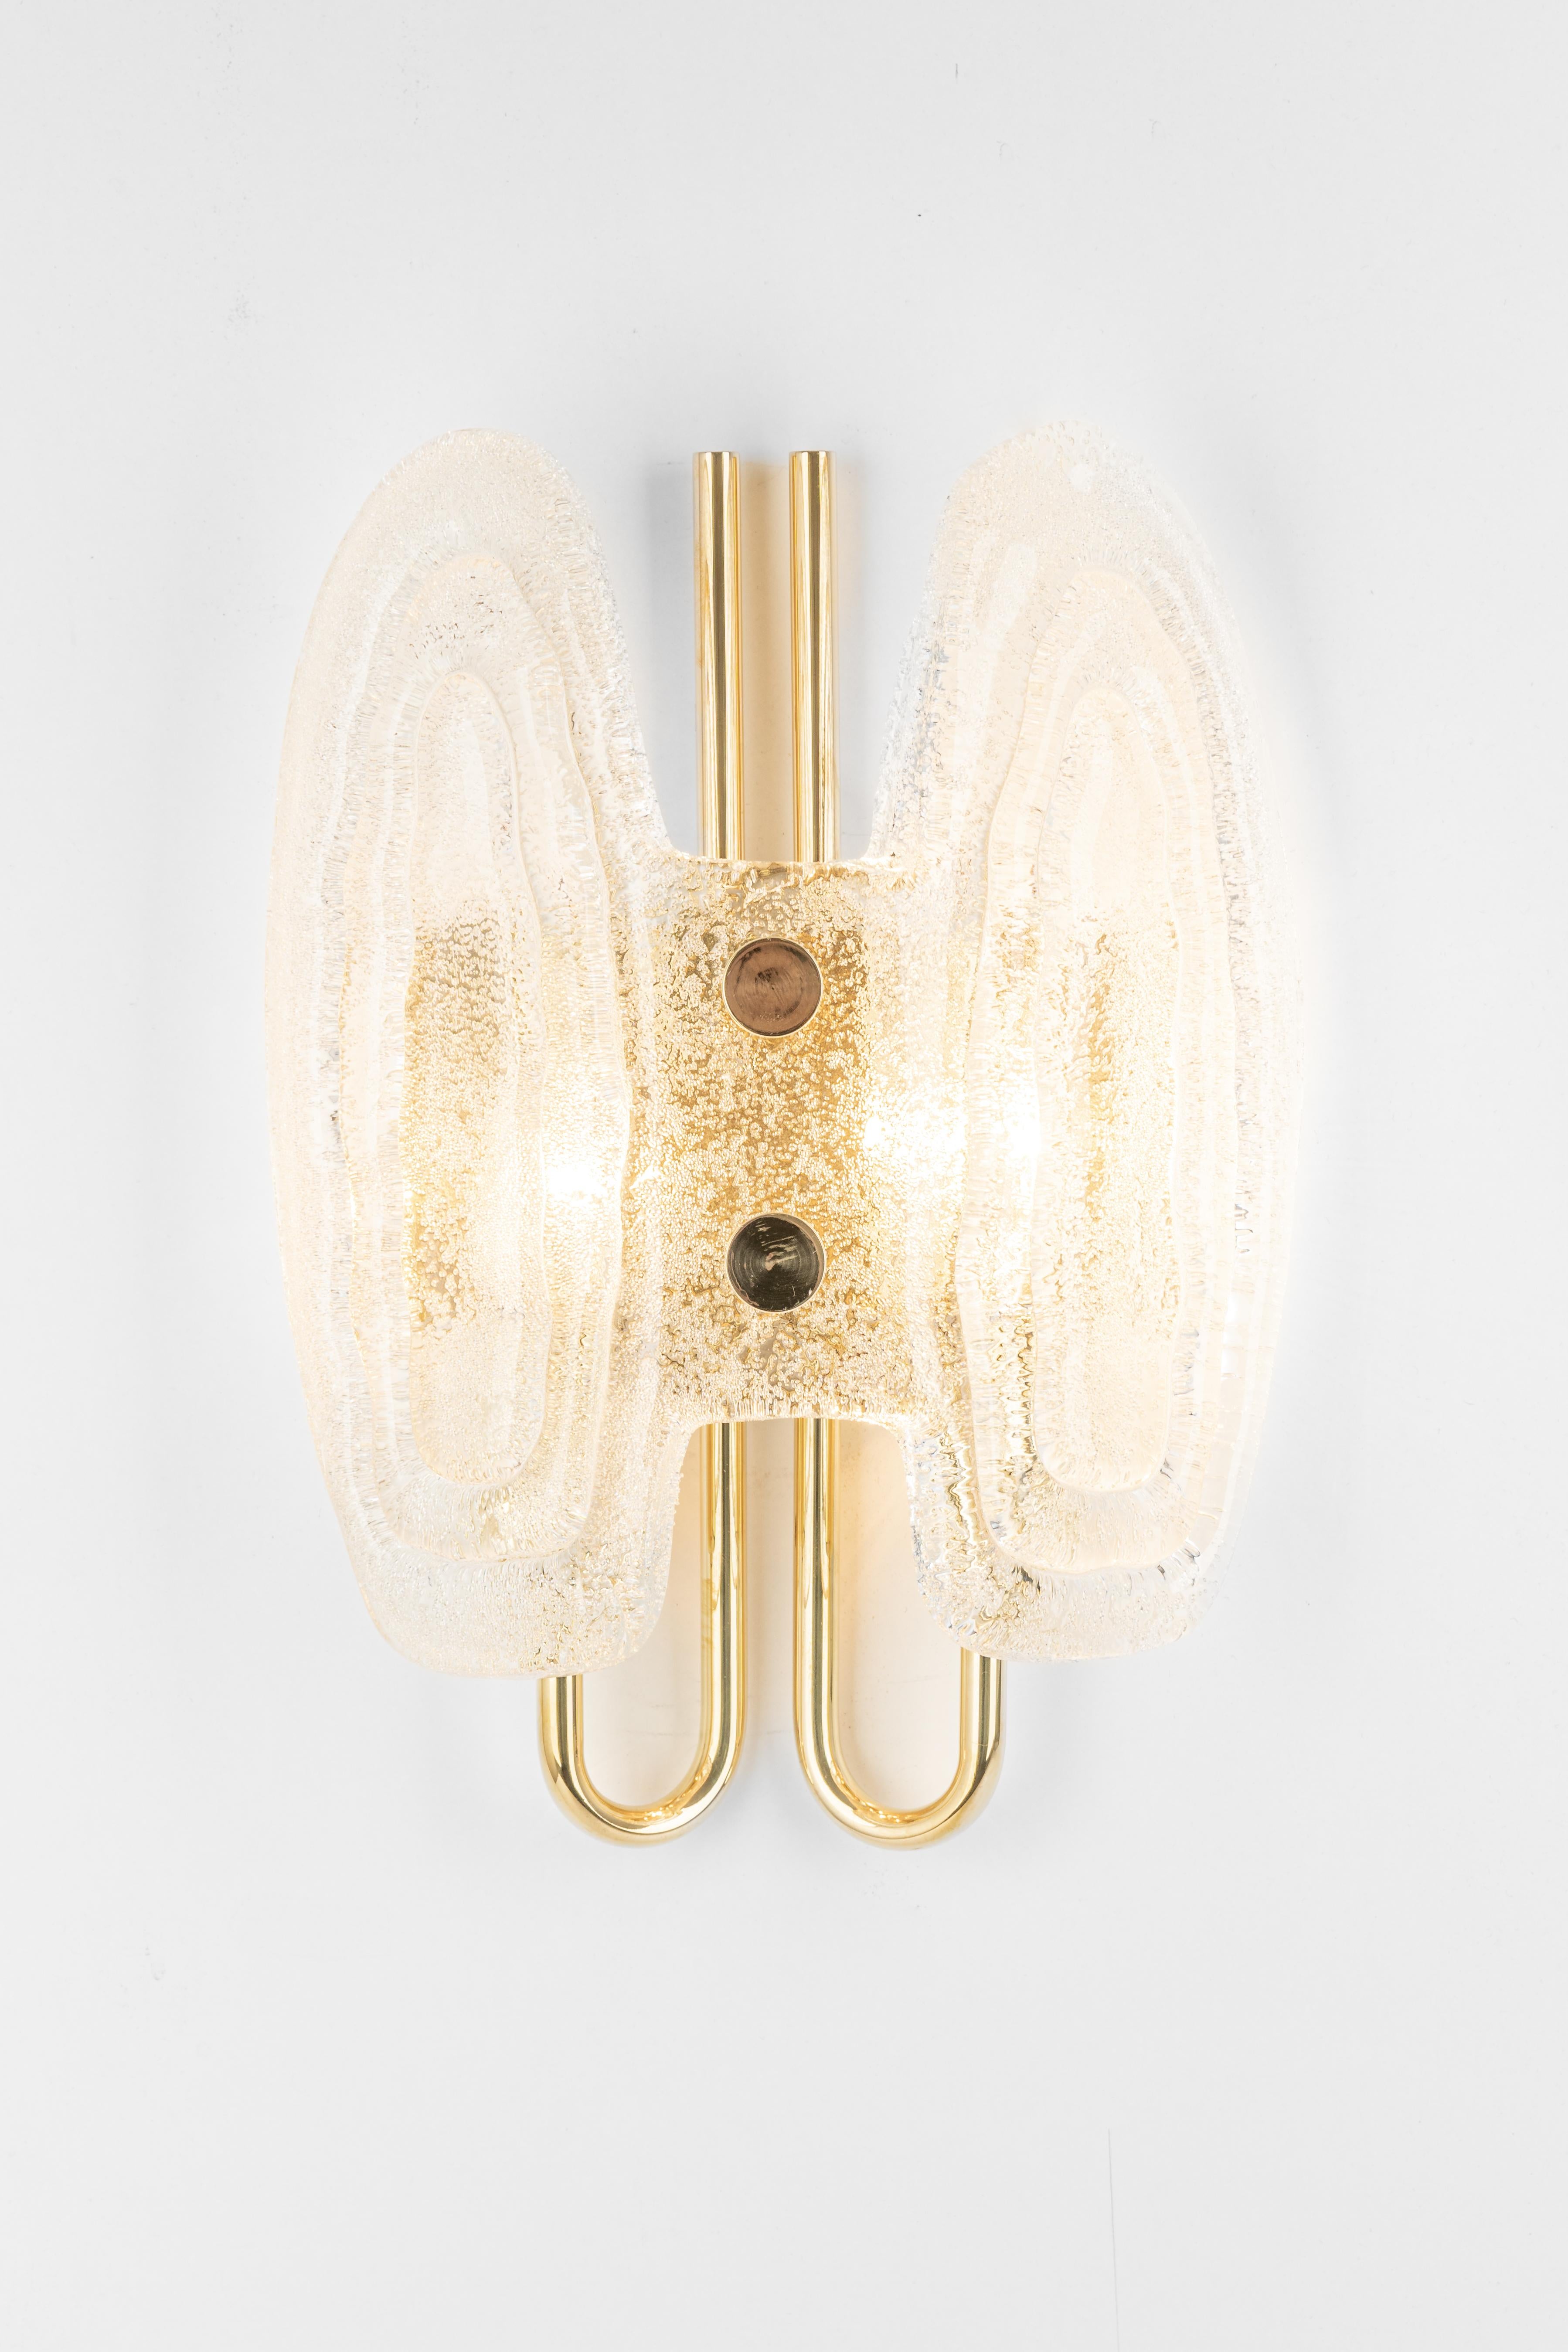 Pair of Murano Ice Glass Brass Sconces by Hillebrand, Germany, 1970s For Sale 1